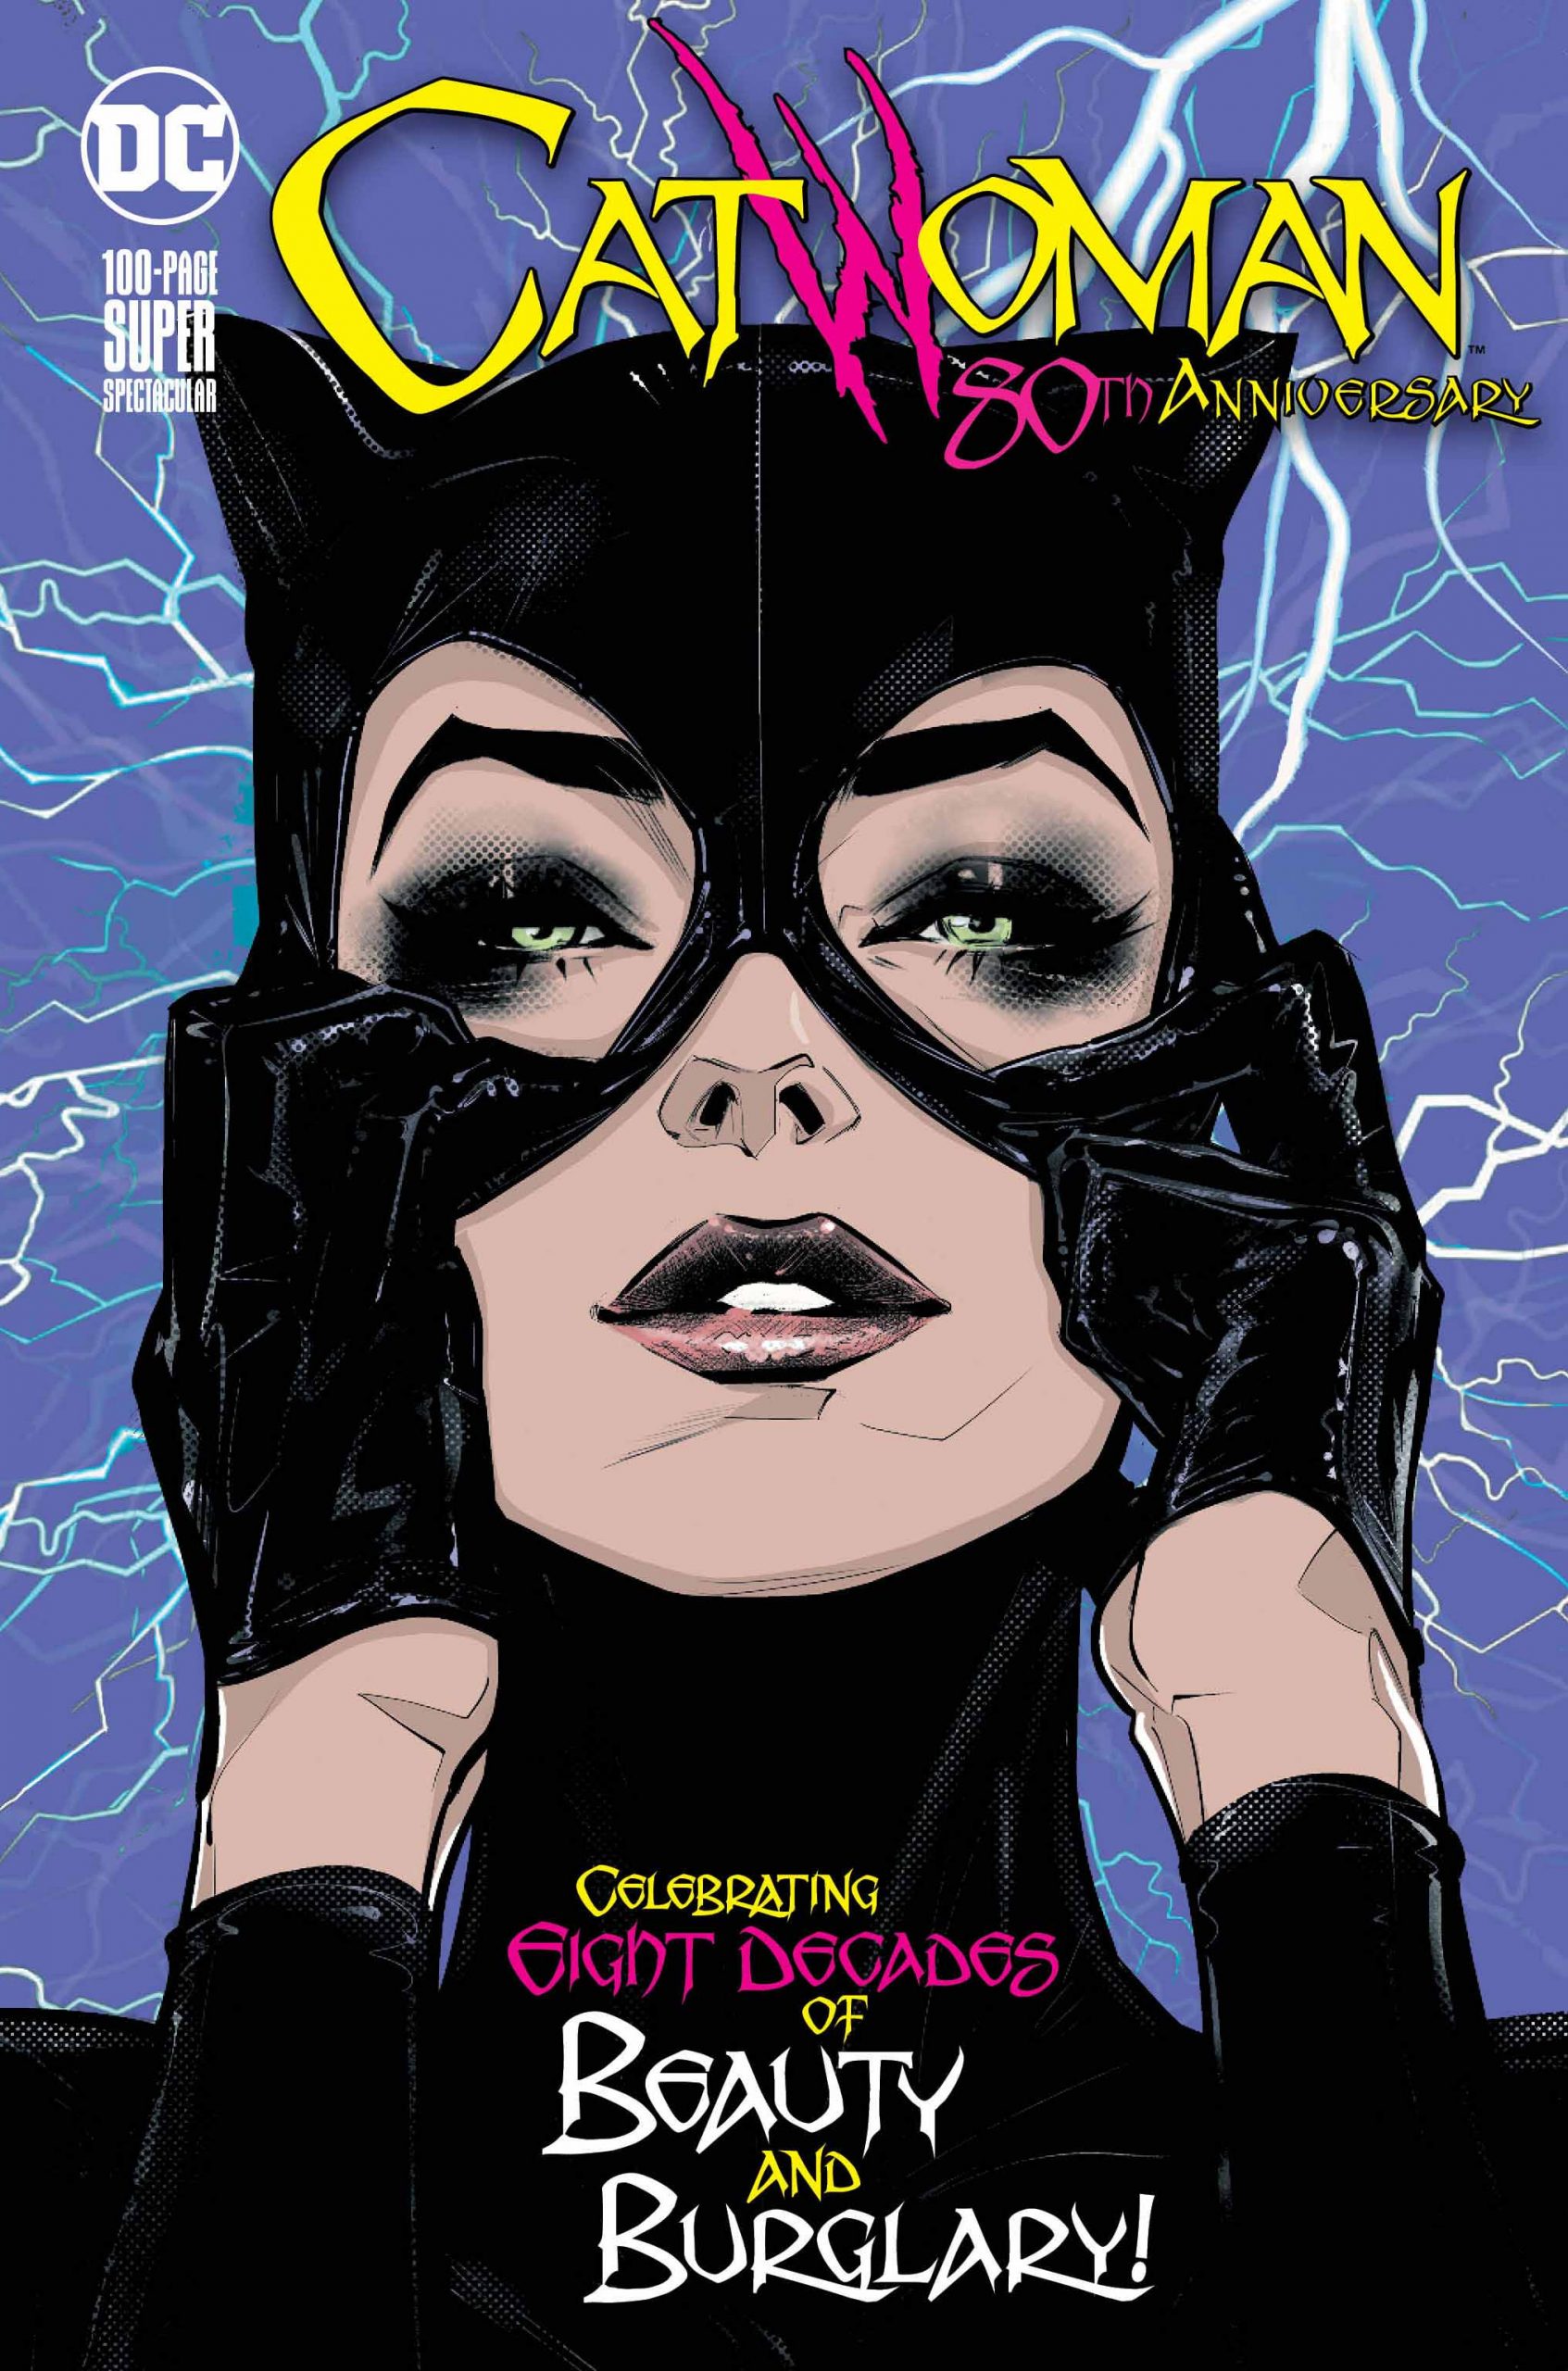 Catwoman 80th Anniversary Joëlle Jones Cover